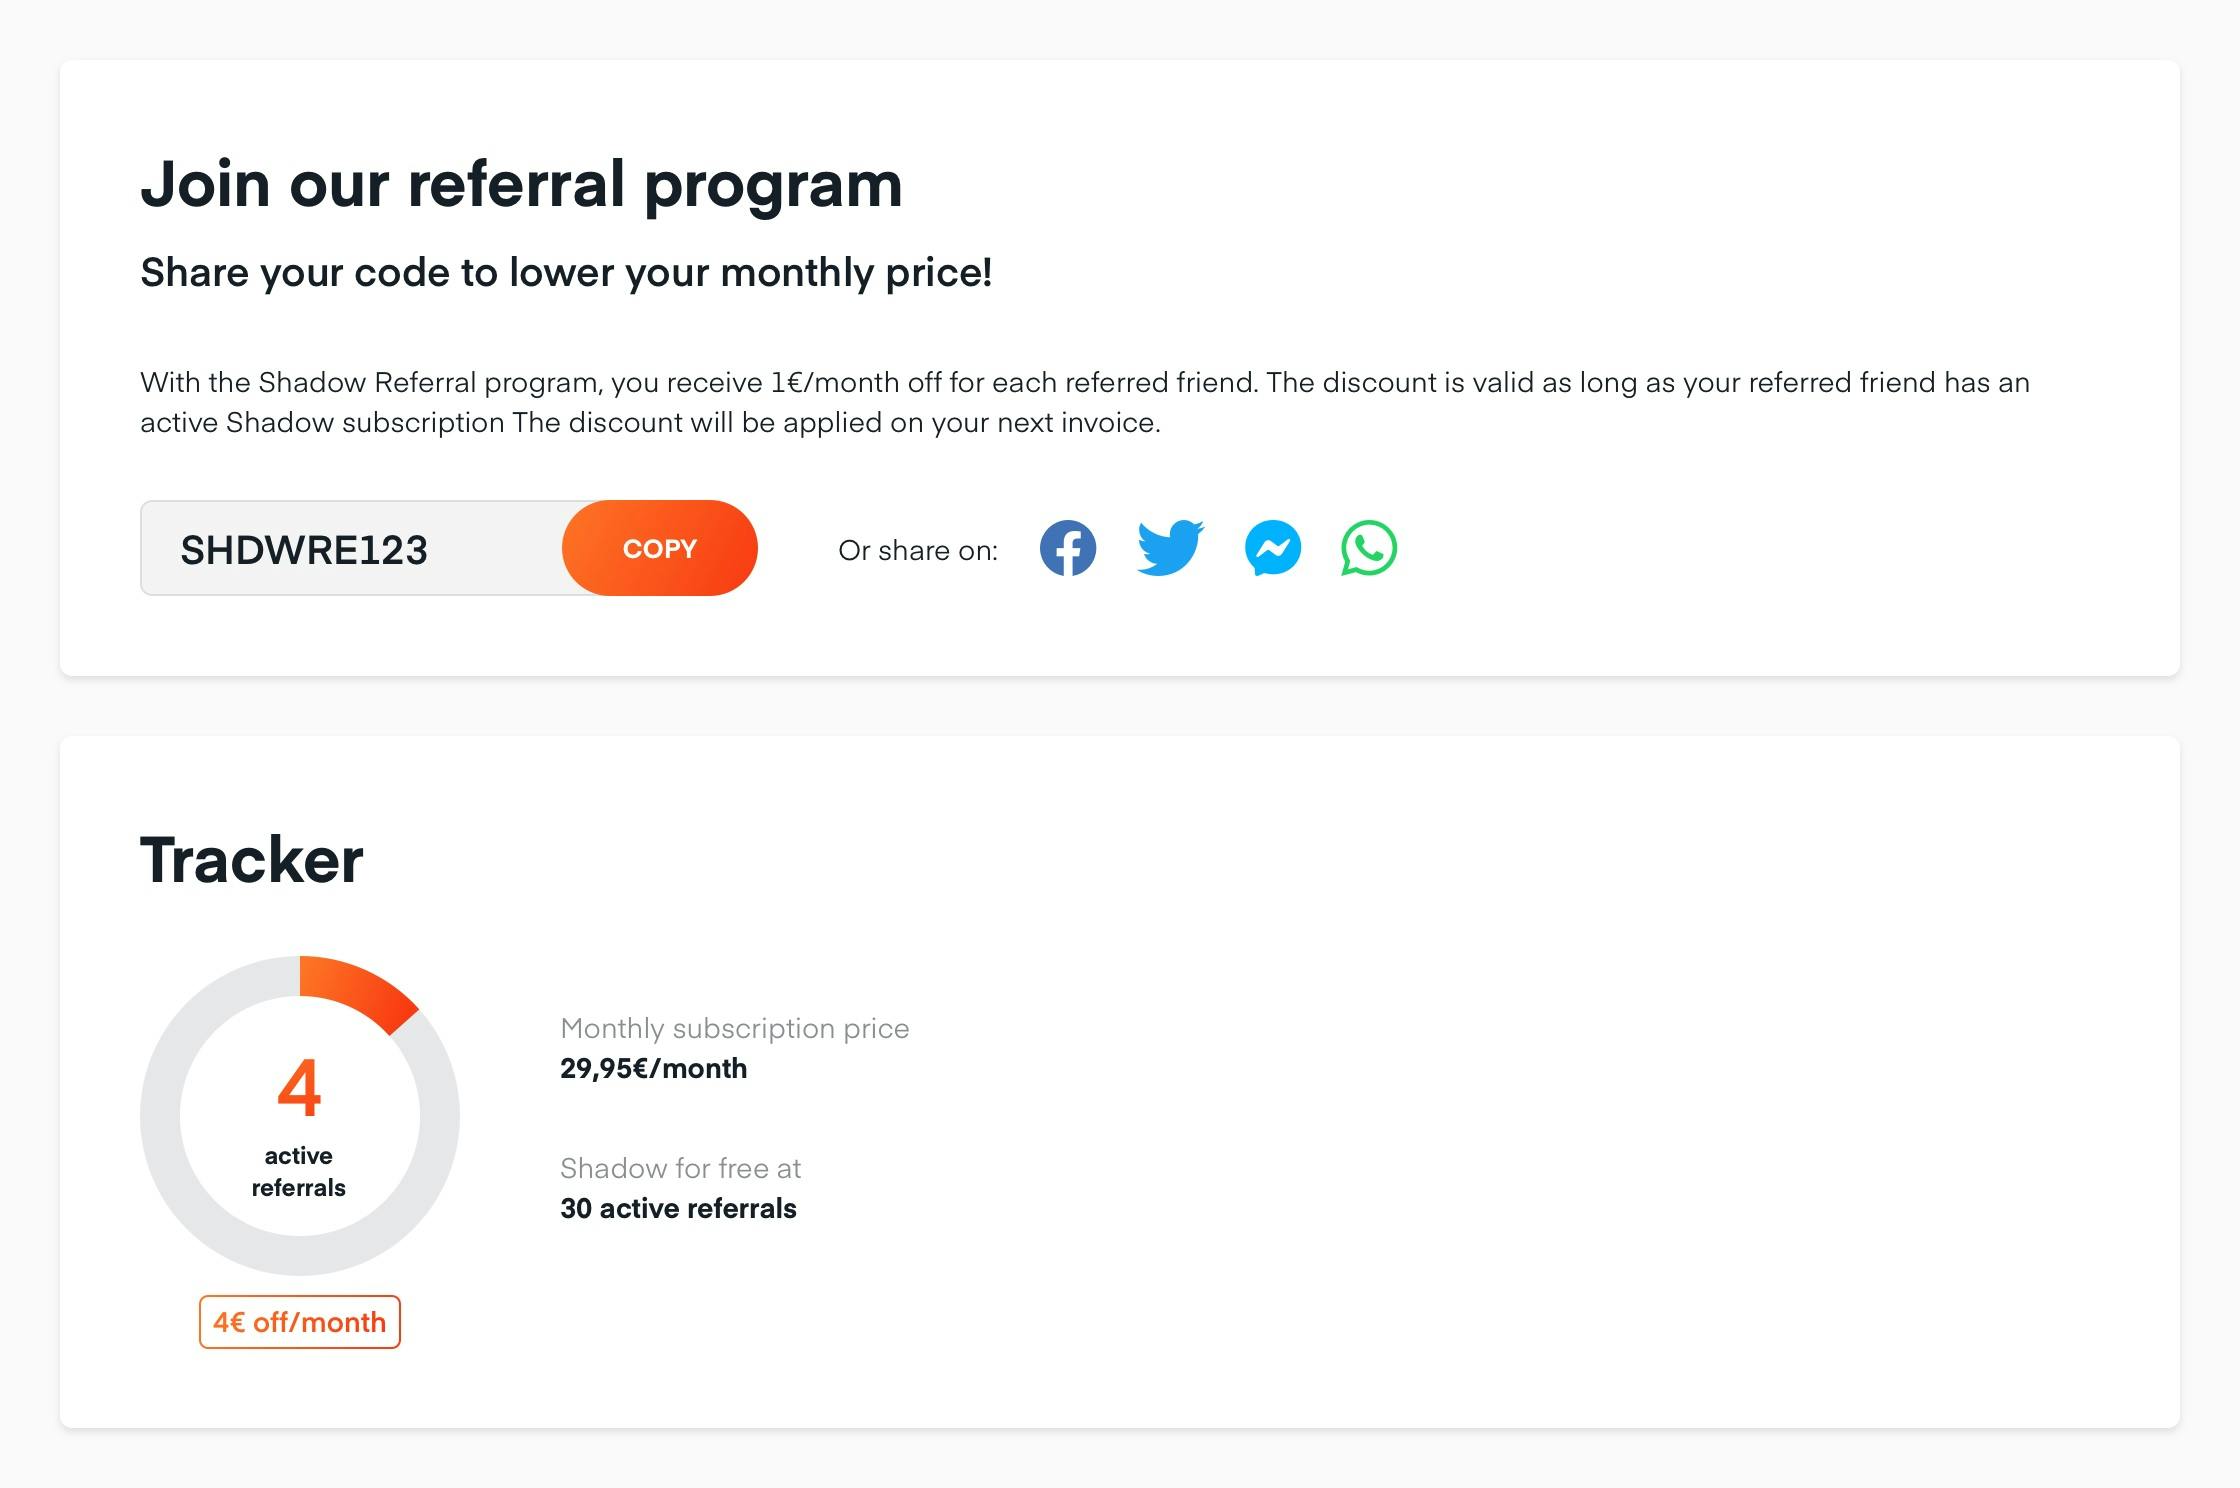 Where to find the Shadow Referral Program?